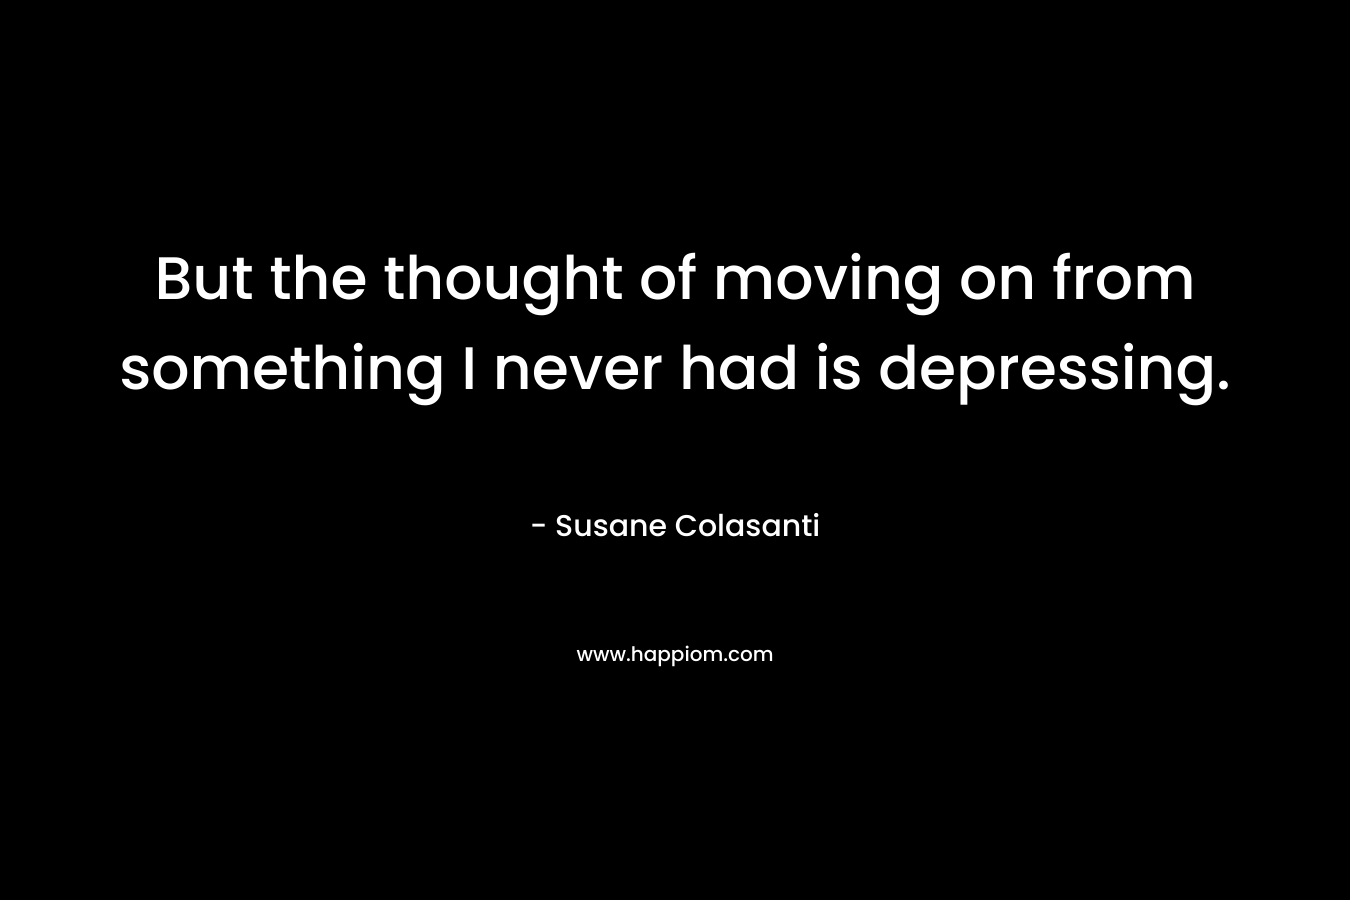 But the thought of moving on from something I never had is depressing. – Susane Colasanti